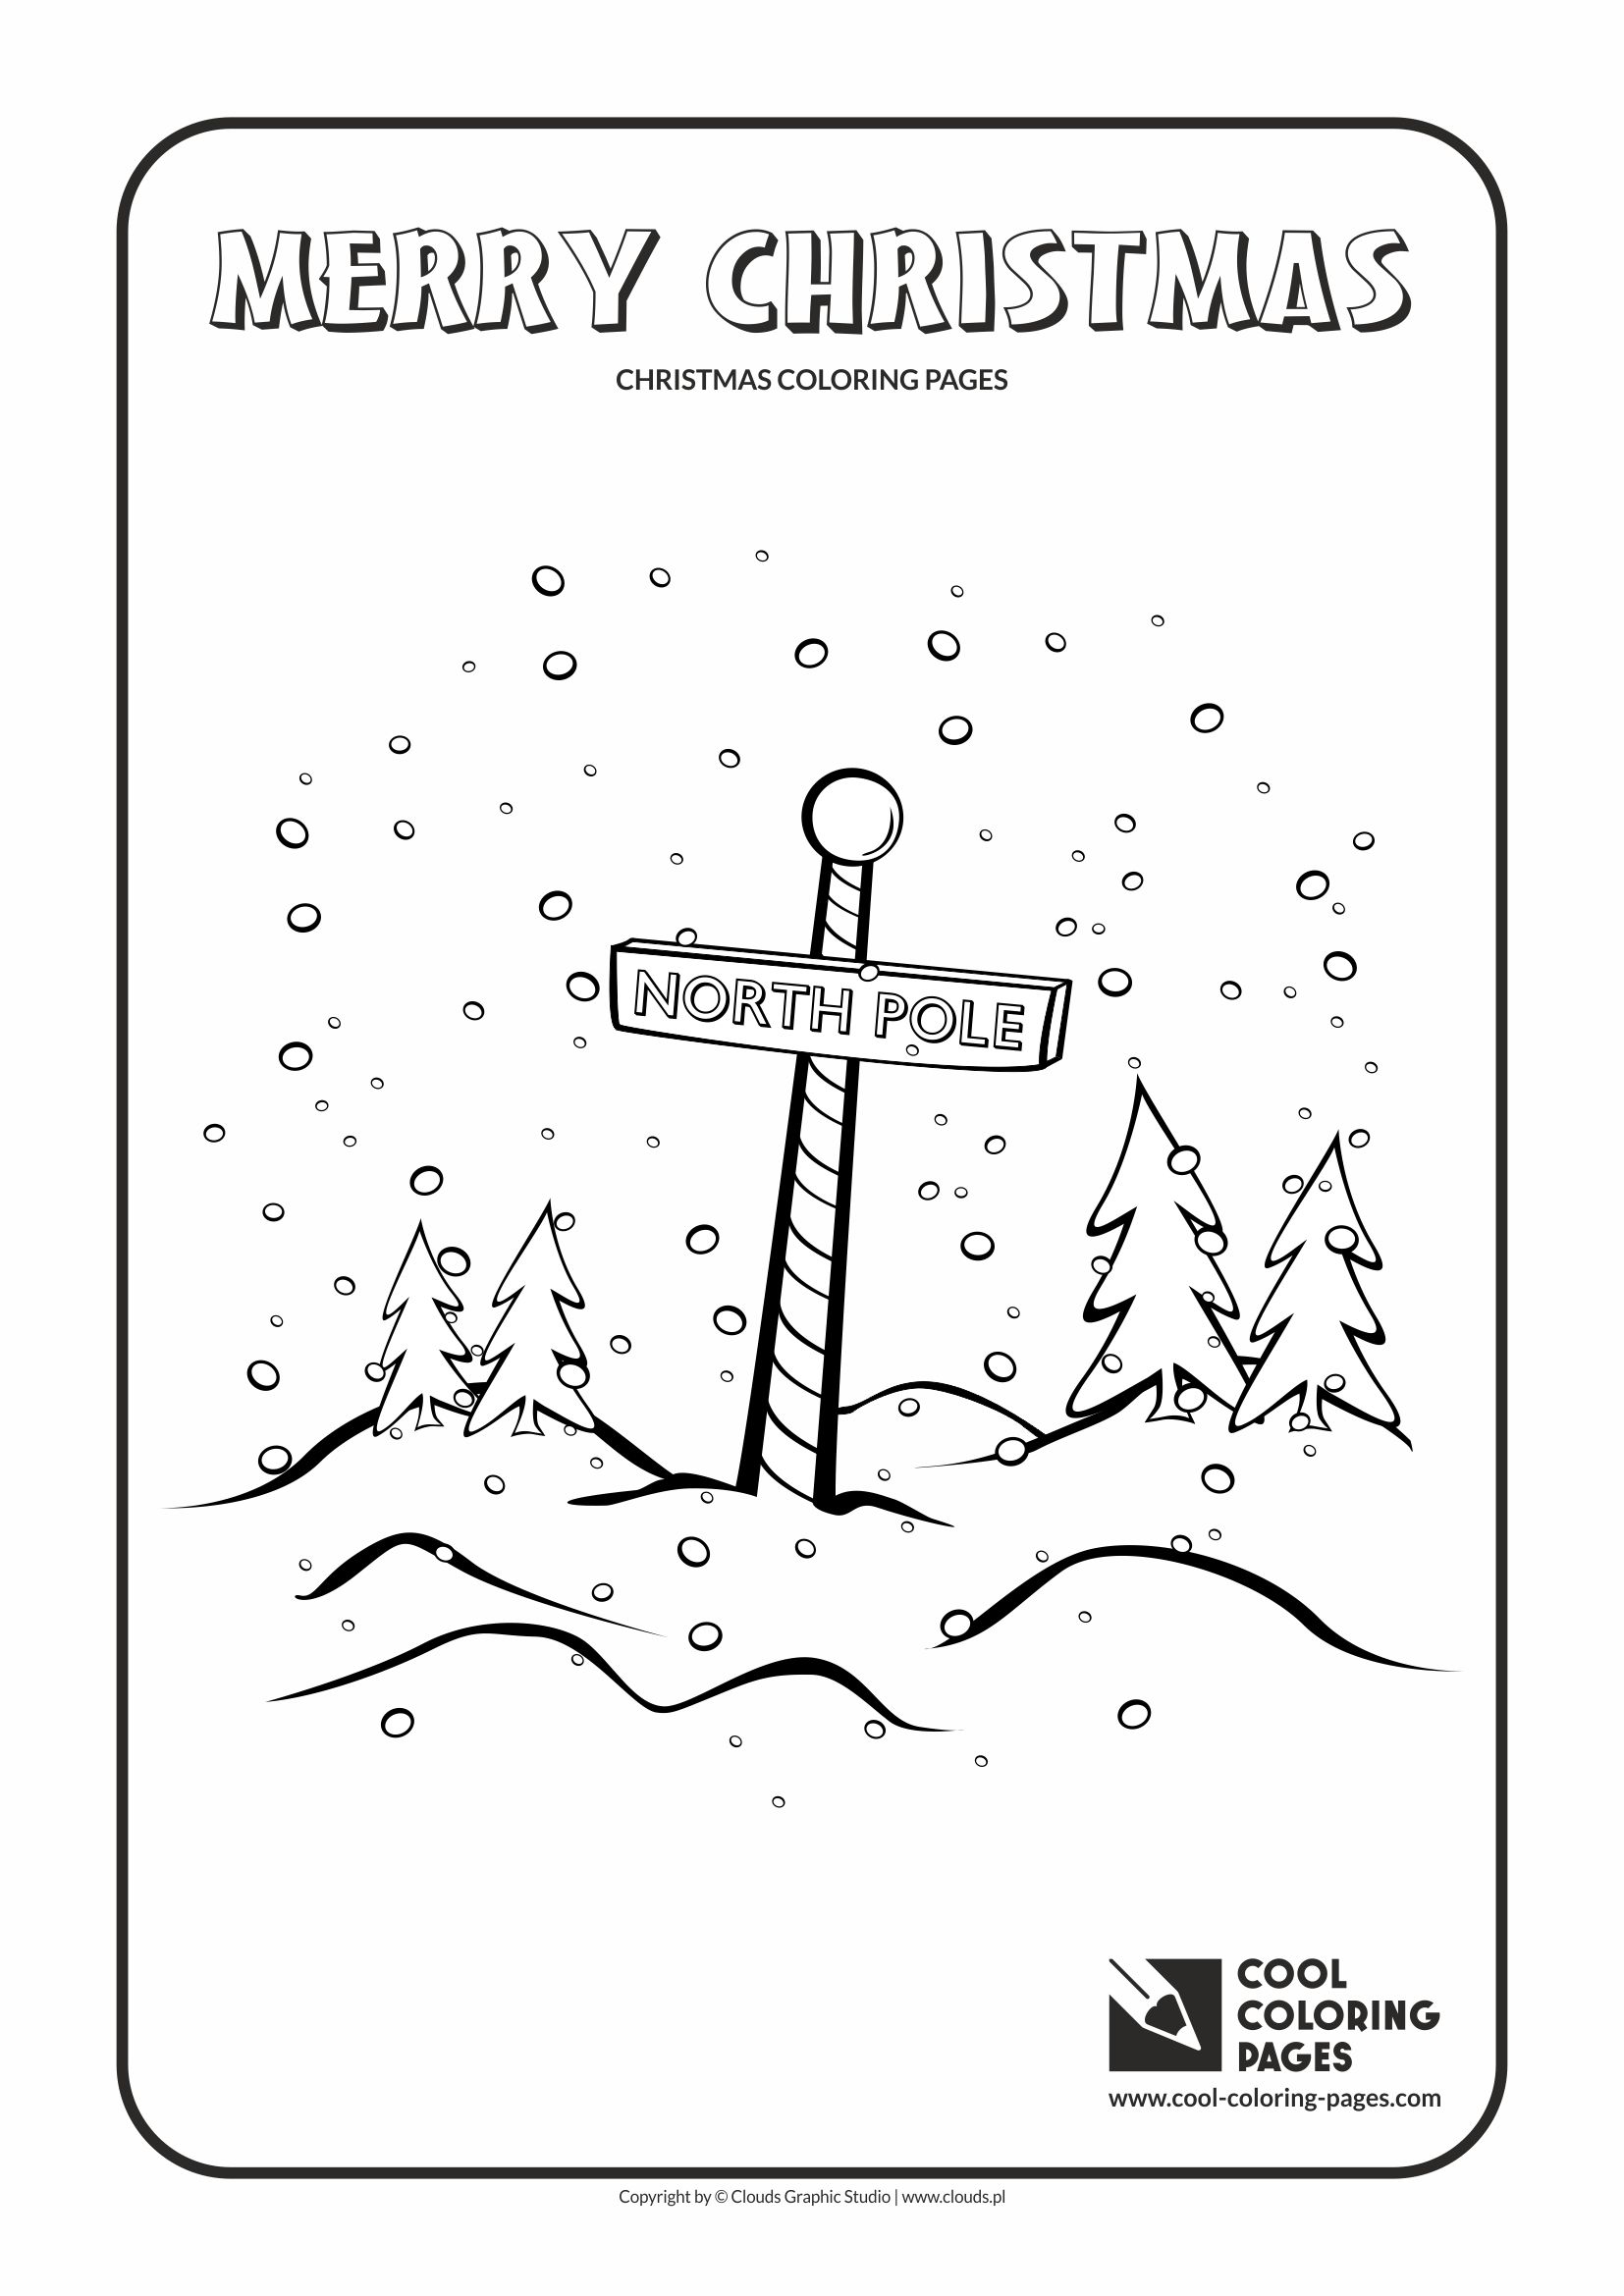 Cool Coloring Pages - Holidays / North Pole no 1 / Coloring page with North Pole no 1